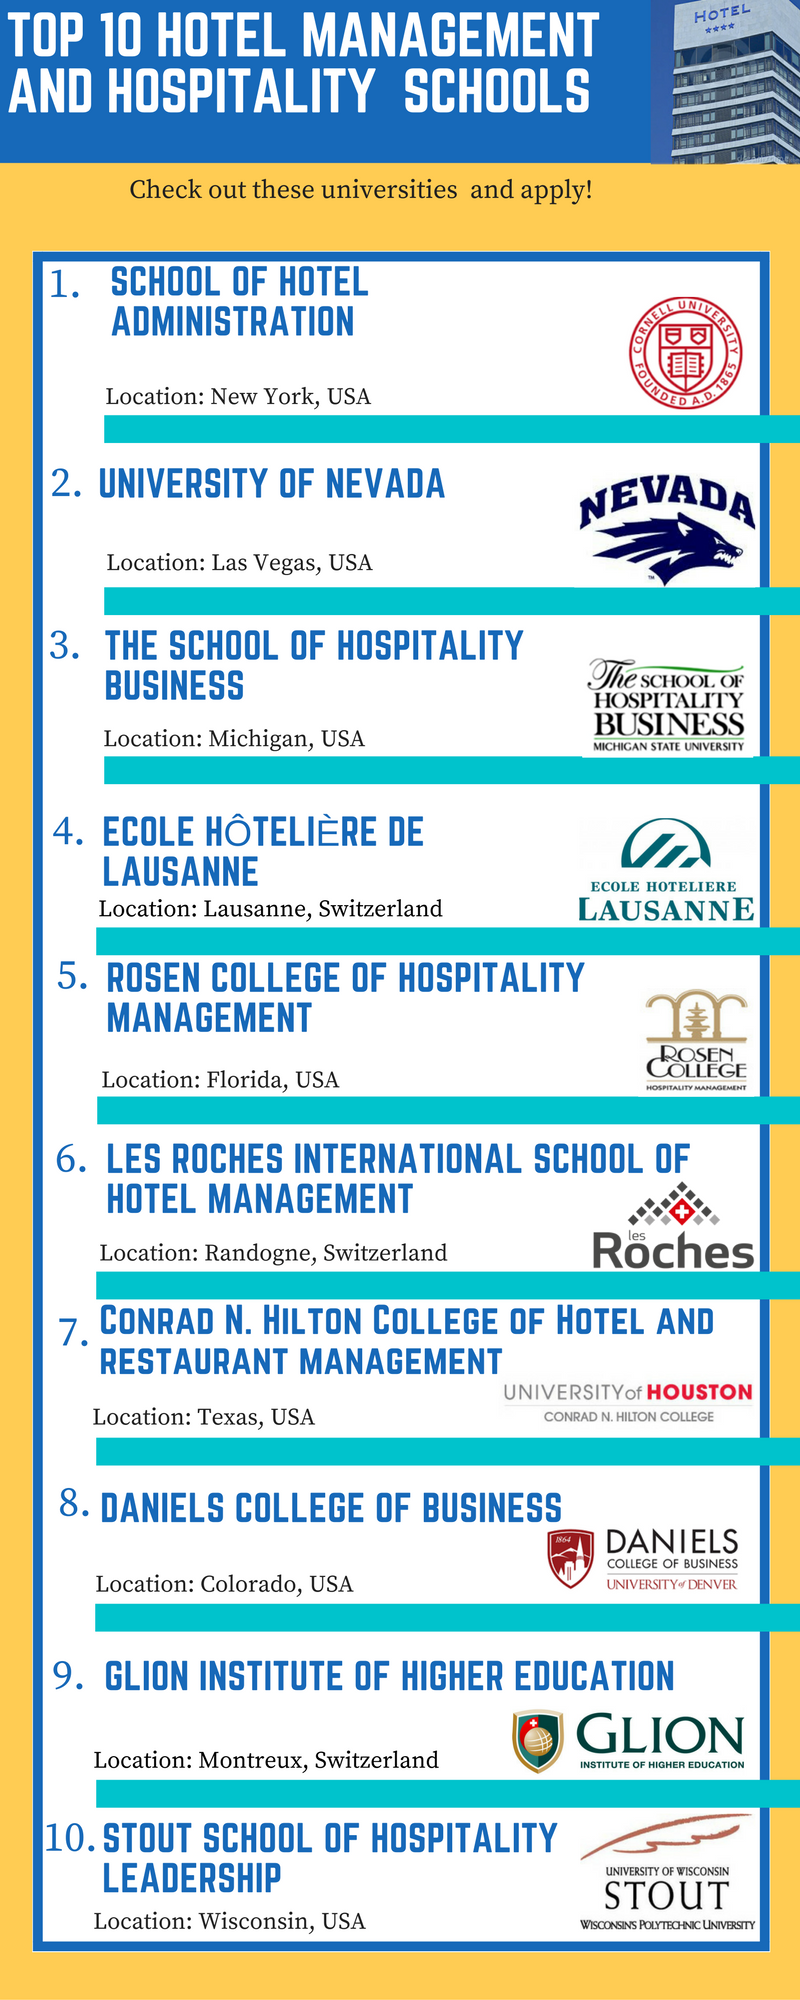 Top 10 hotel management and hospitality schools